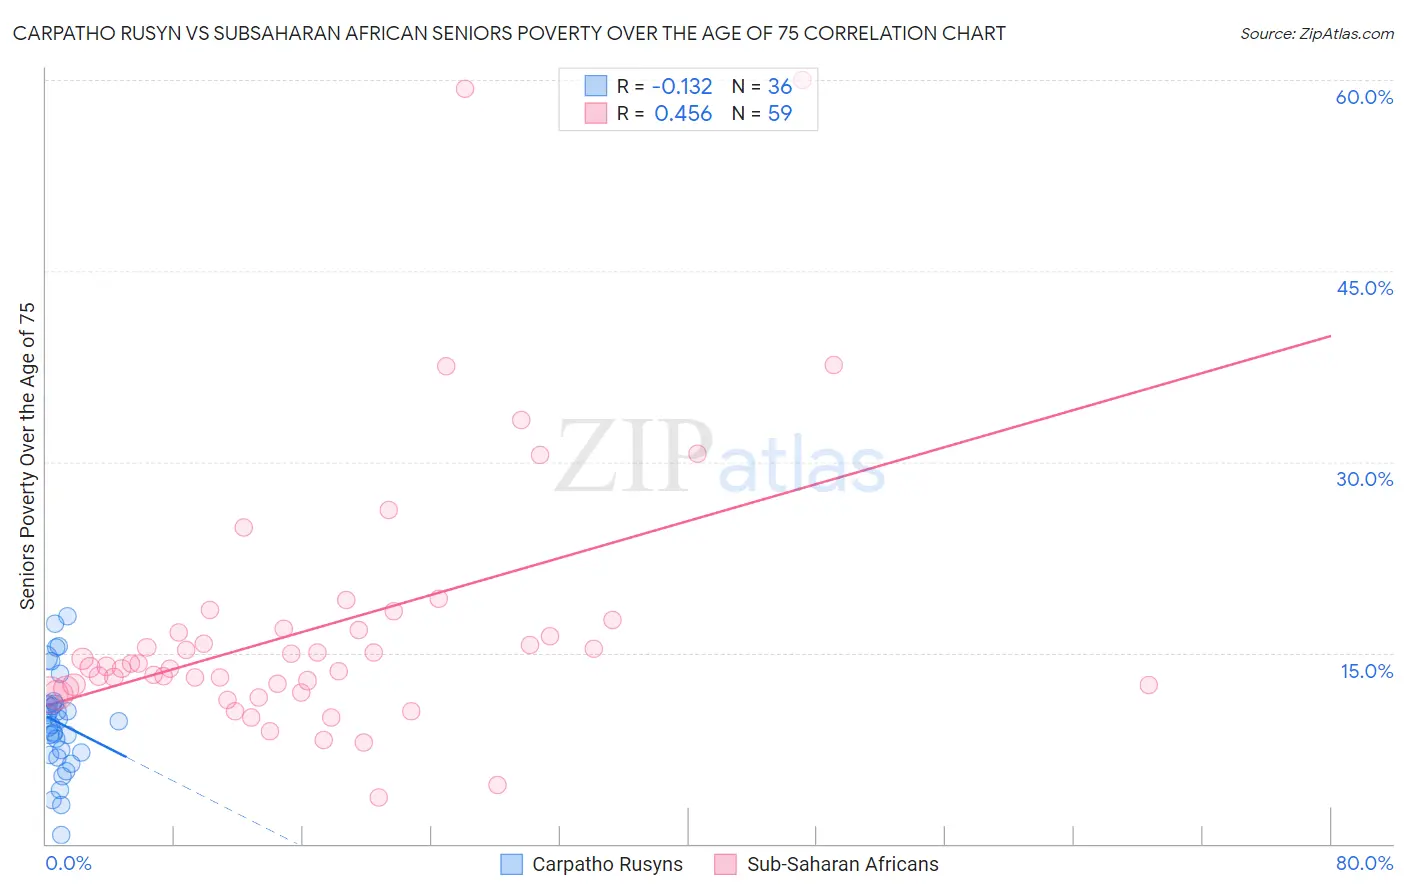 Carpatho Rusyn vs Subsaharan African Seniors Poverty Over the Age of 75